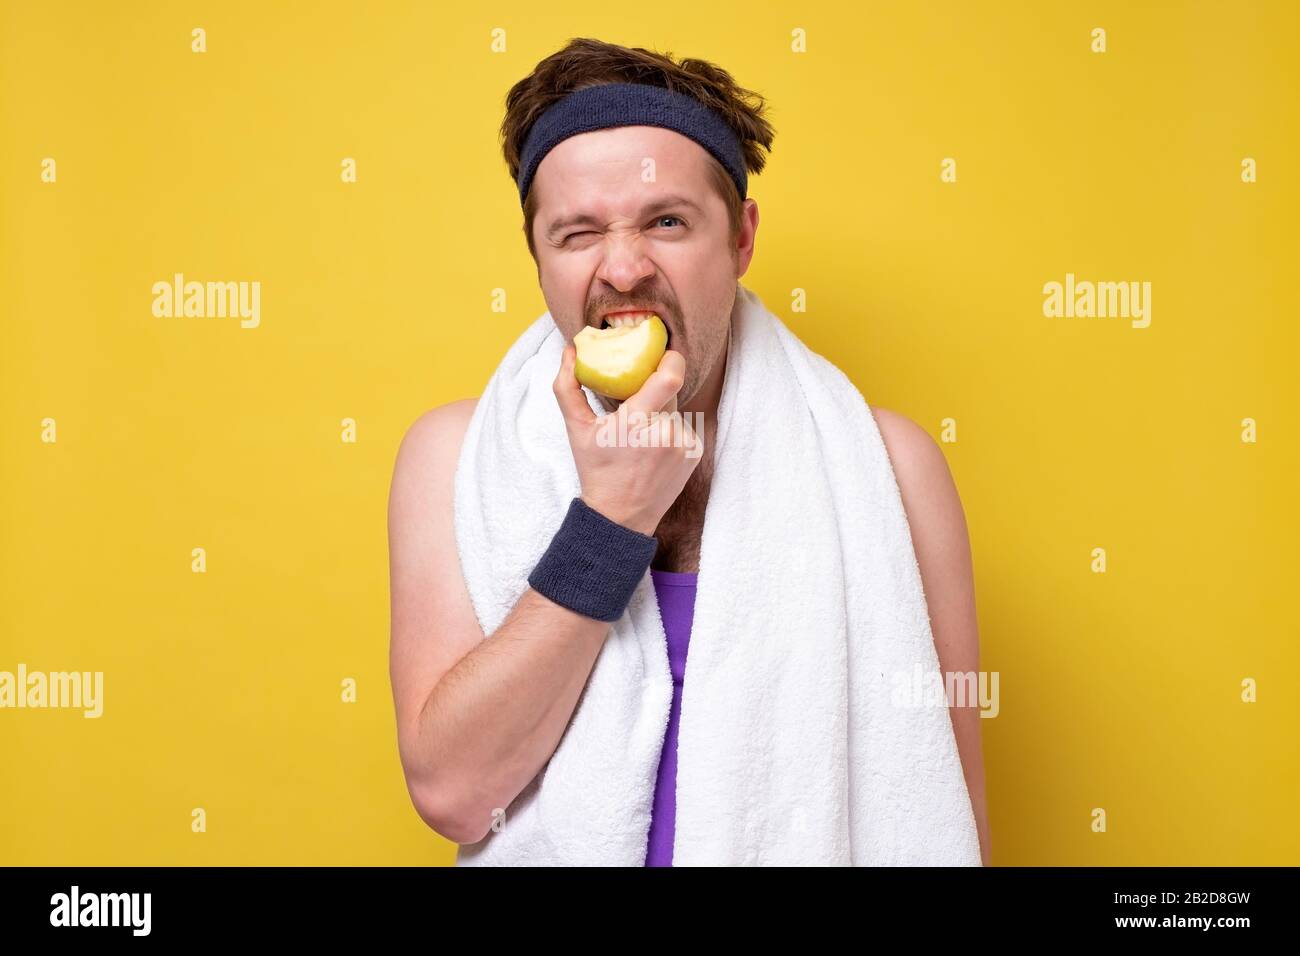 Fitness man with towel eating apple isolated on a yellow background. Healthy diet for sportsman. Stock Photo